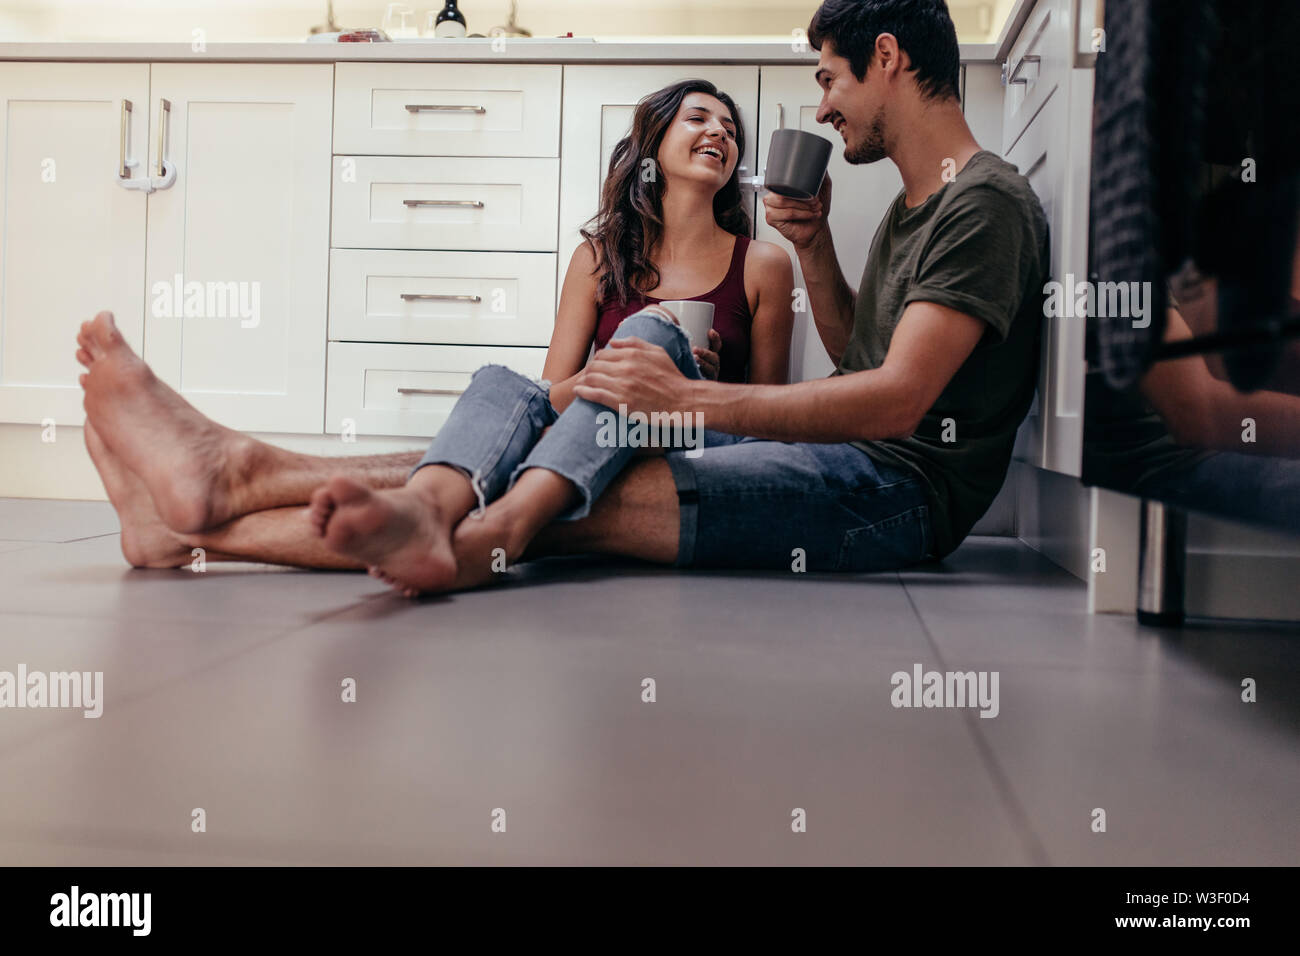 Happy young couple relaxing in kitchen having coffee. Young man and woman sitting on kitchen floor drinking coffee Stock Photo